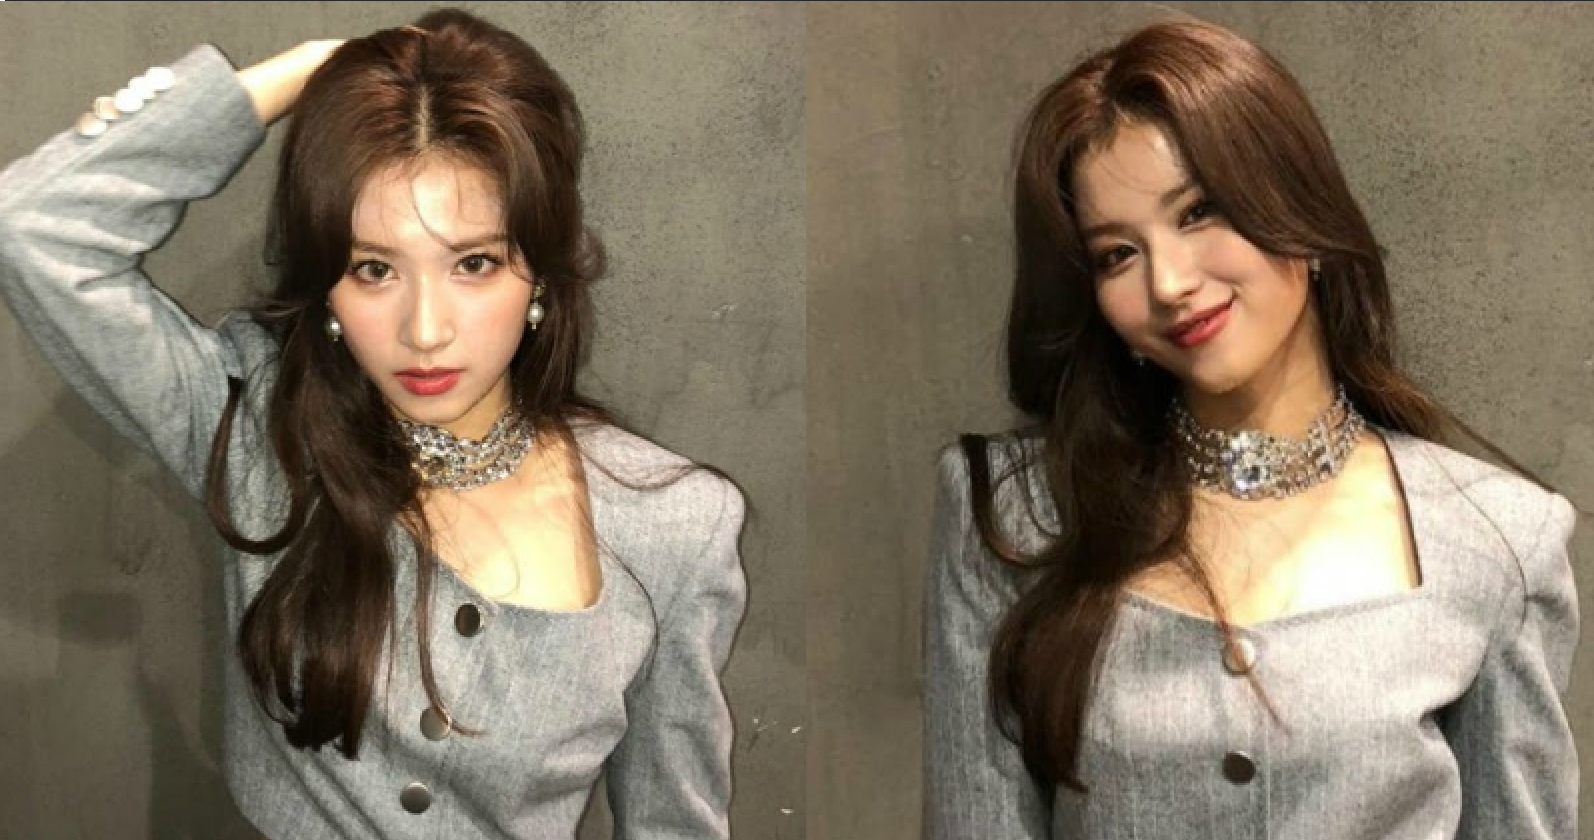 TWICE Sana Net Worth — How Rich is the 'CHEER UP' Singer?